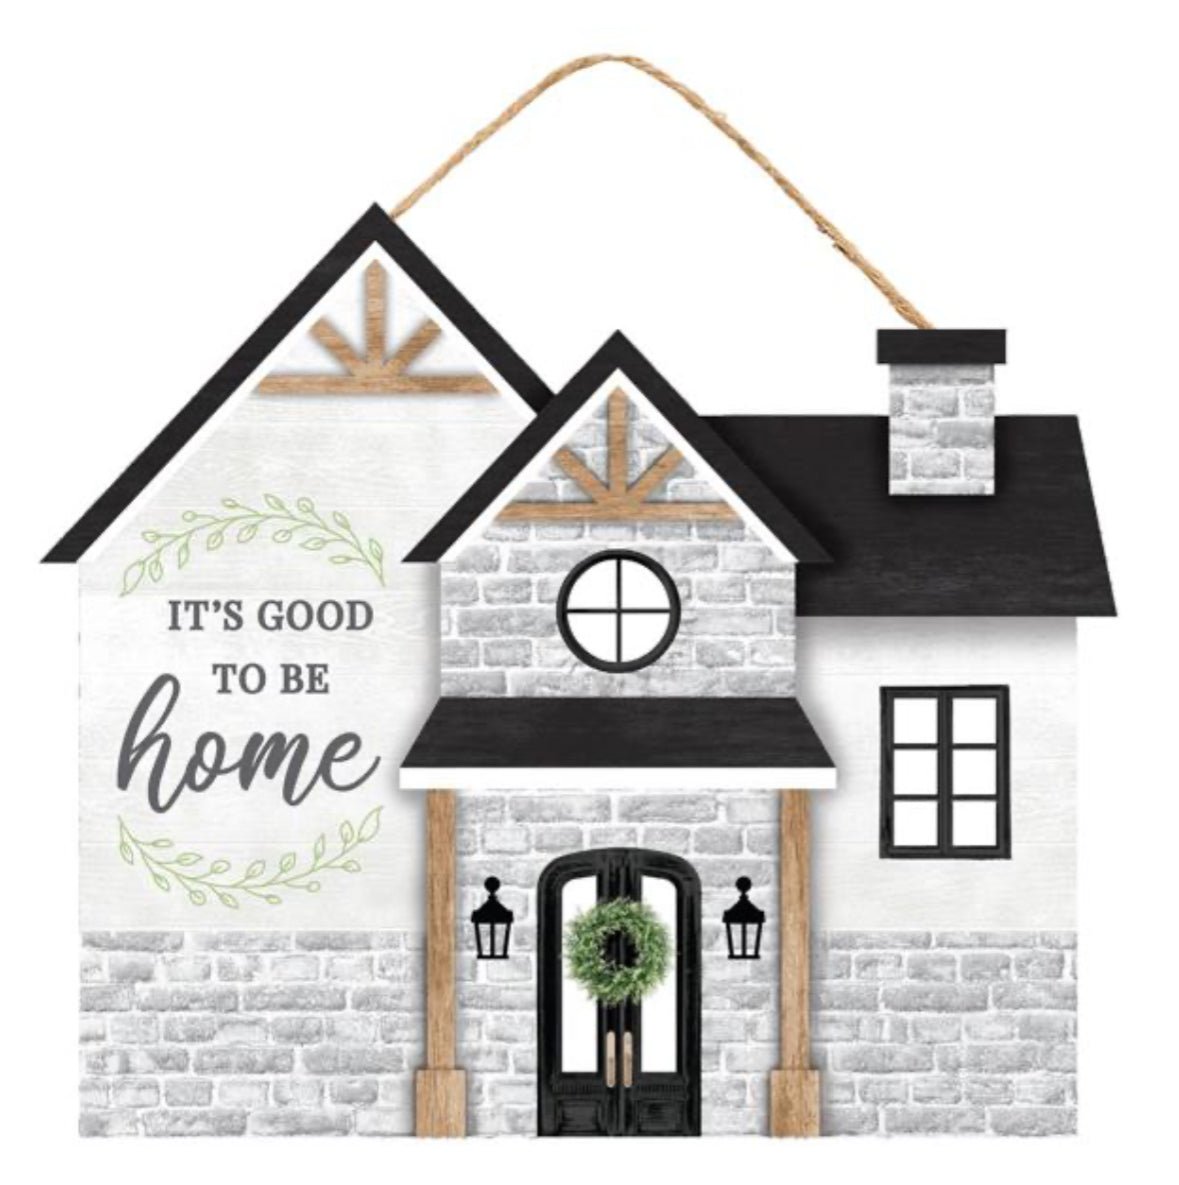 Its good to be home house sign - Greenery Marketsigns for wreathsAP7089